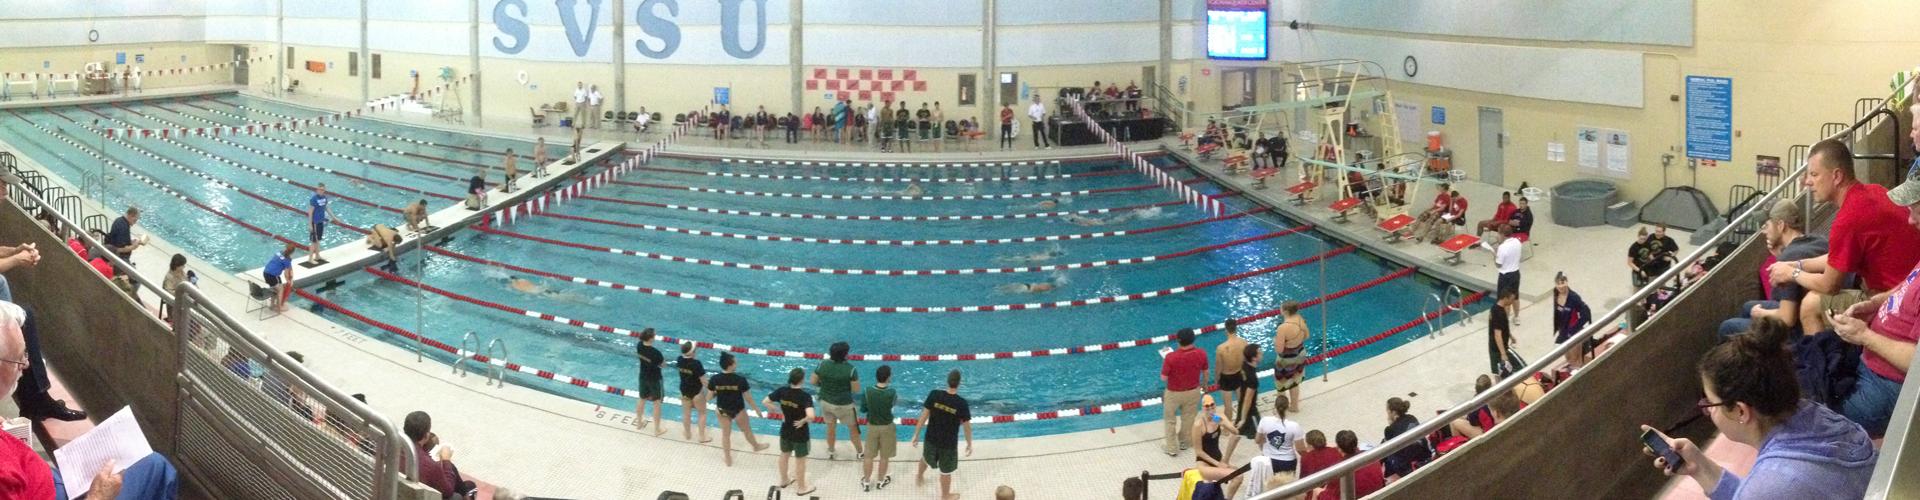 SVSU Swimming and Diving Competition